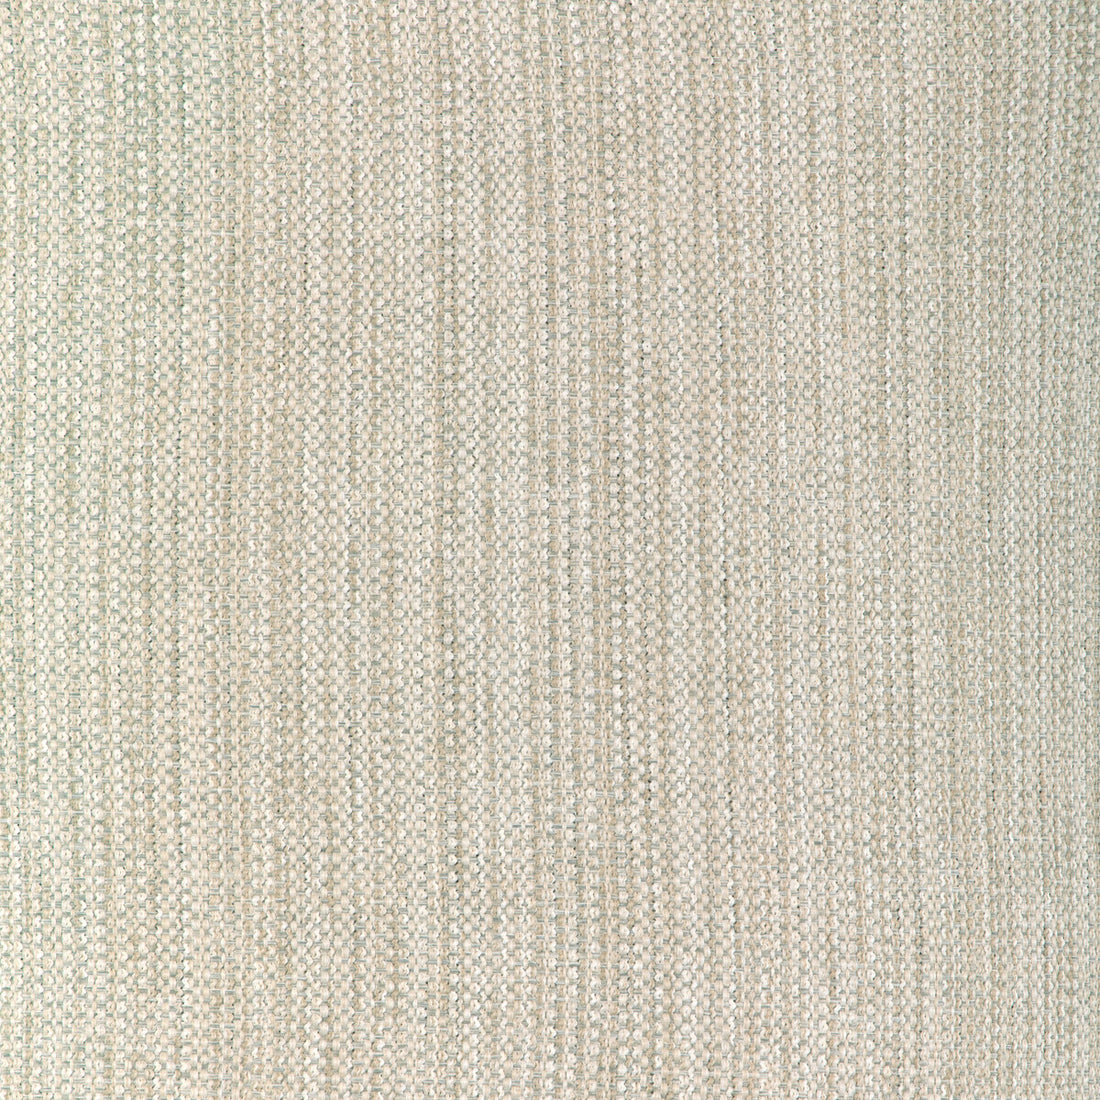 Kravet Smart fabric in 37018-1611 color - pattern 37018.1611.0 - by Kravet Smart in the Gis collection